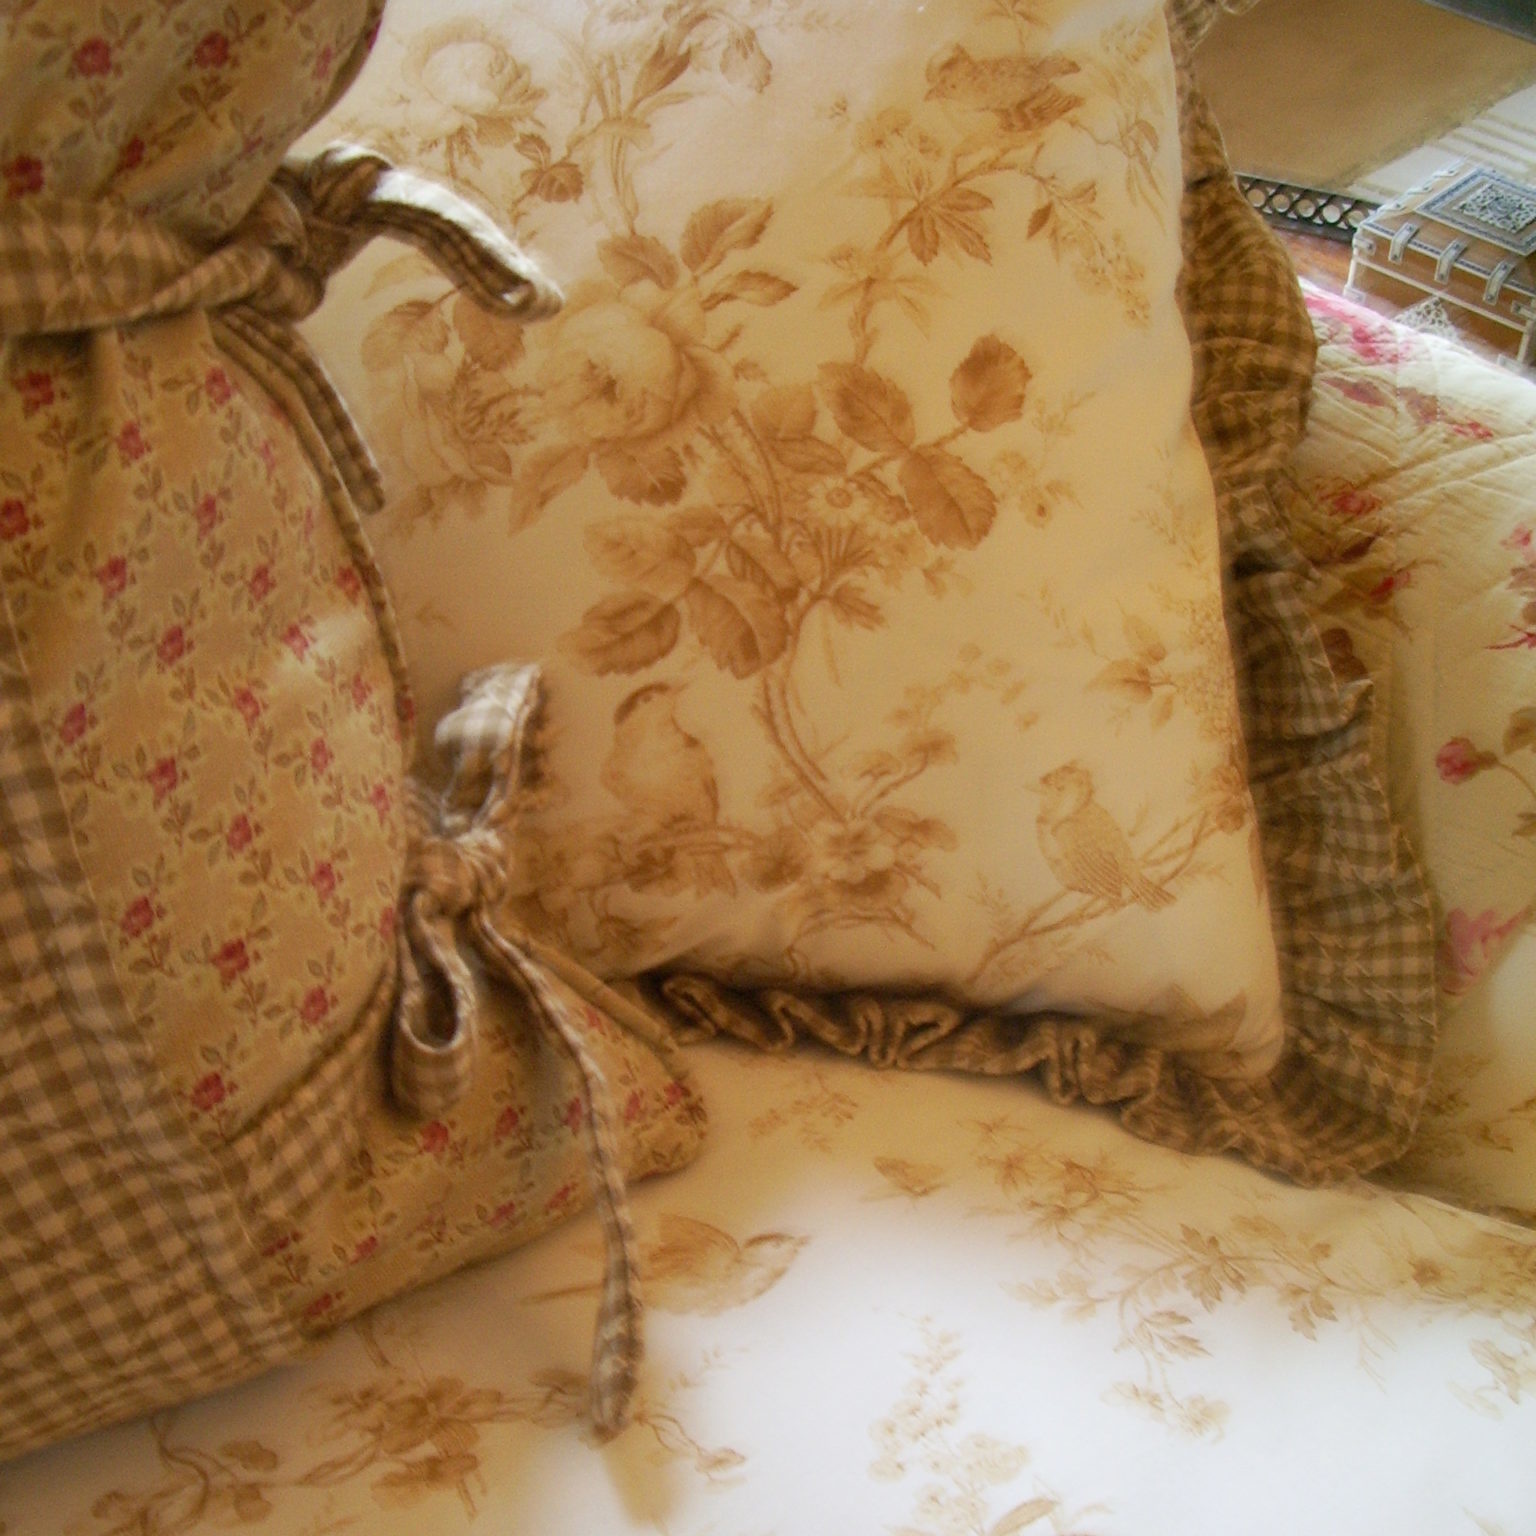 Closeup of decorative pillows with birds and flowers